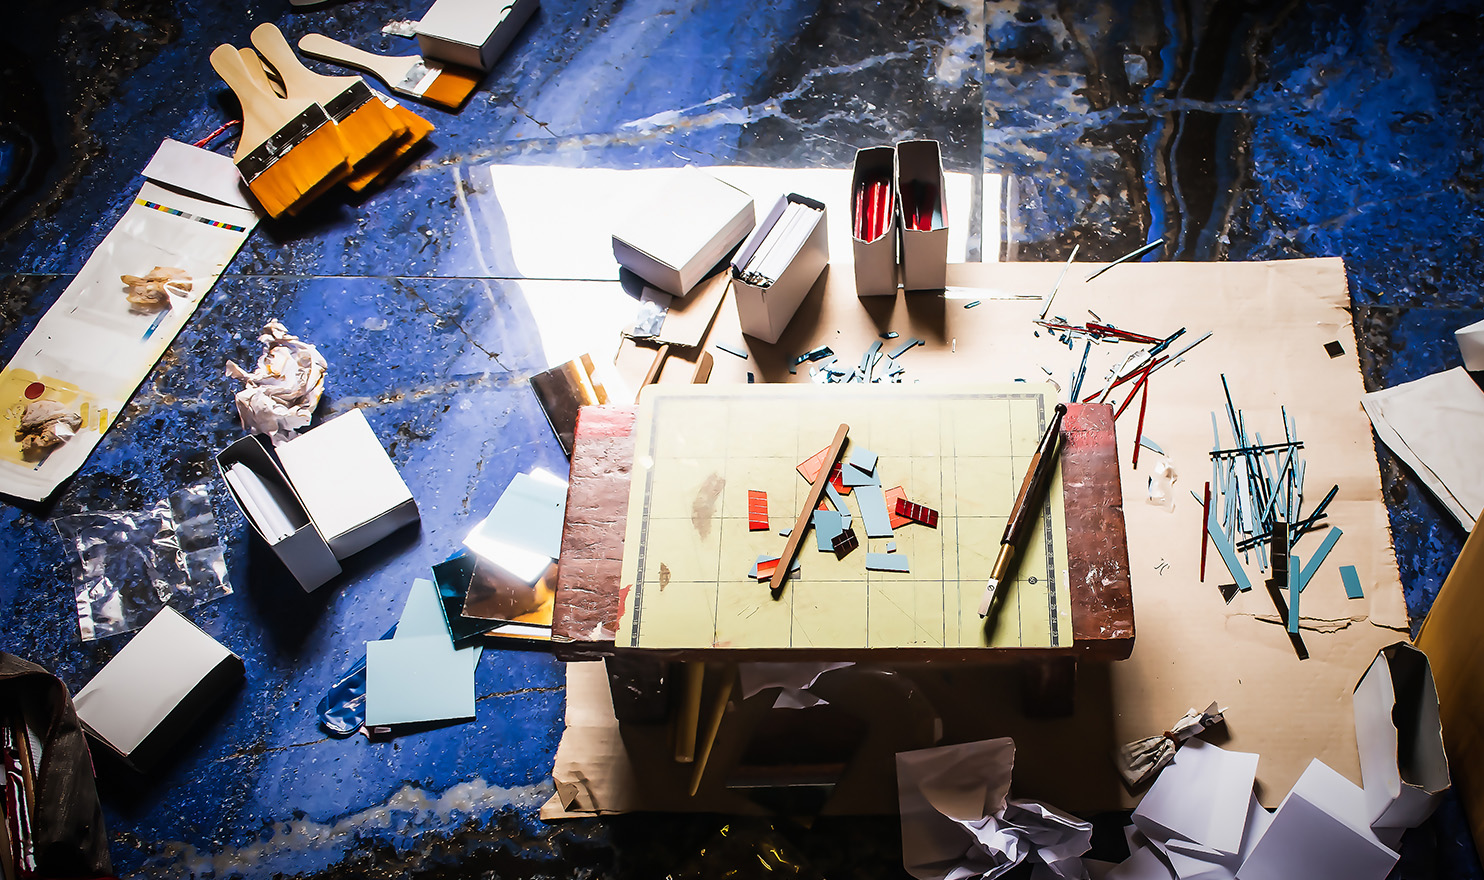 An overhead shot of a variety of crafting tools lay scattered on a small table and a blue tarp on the ground.